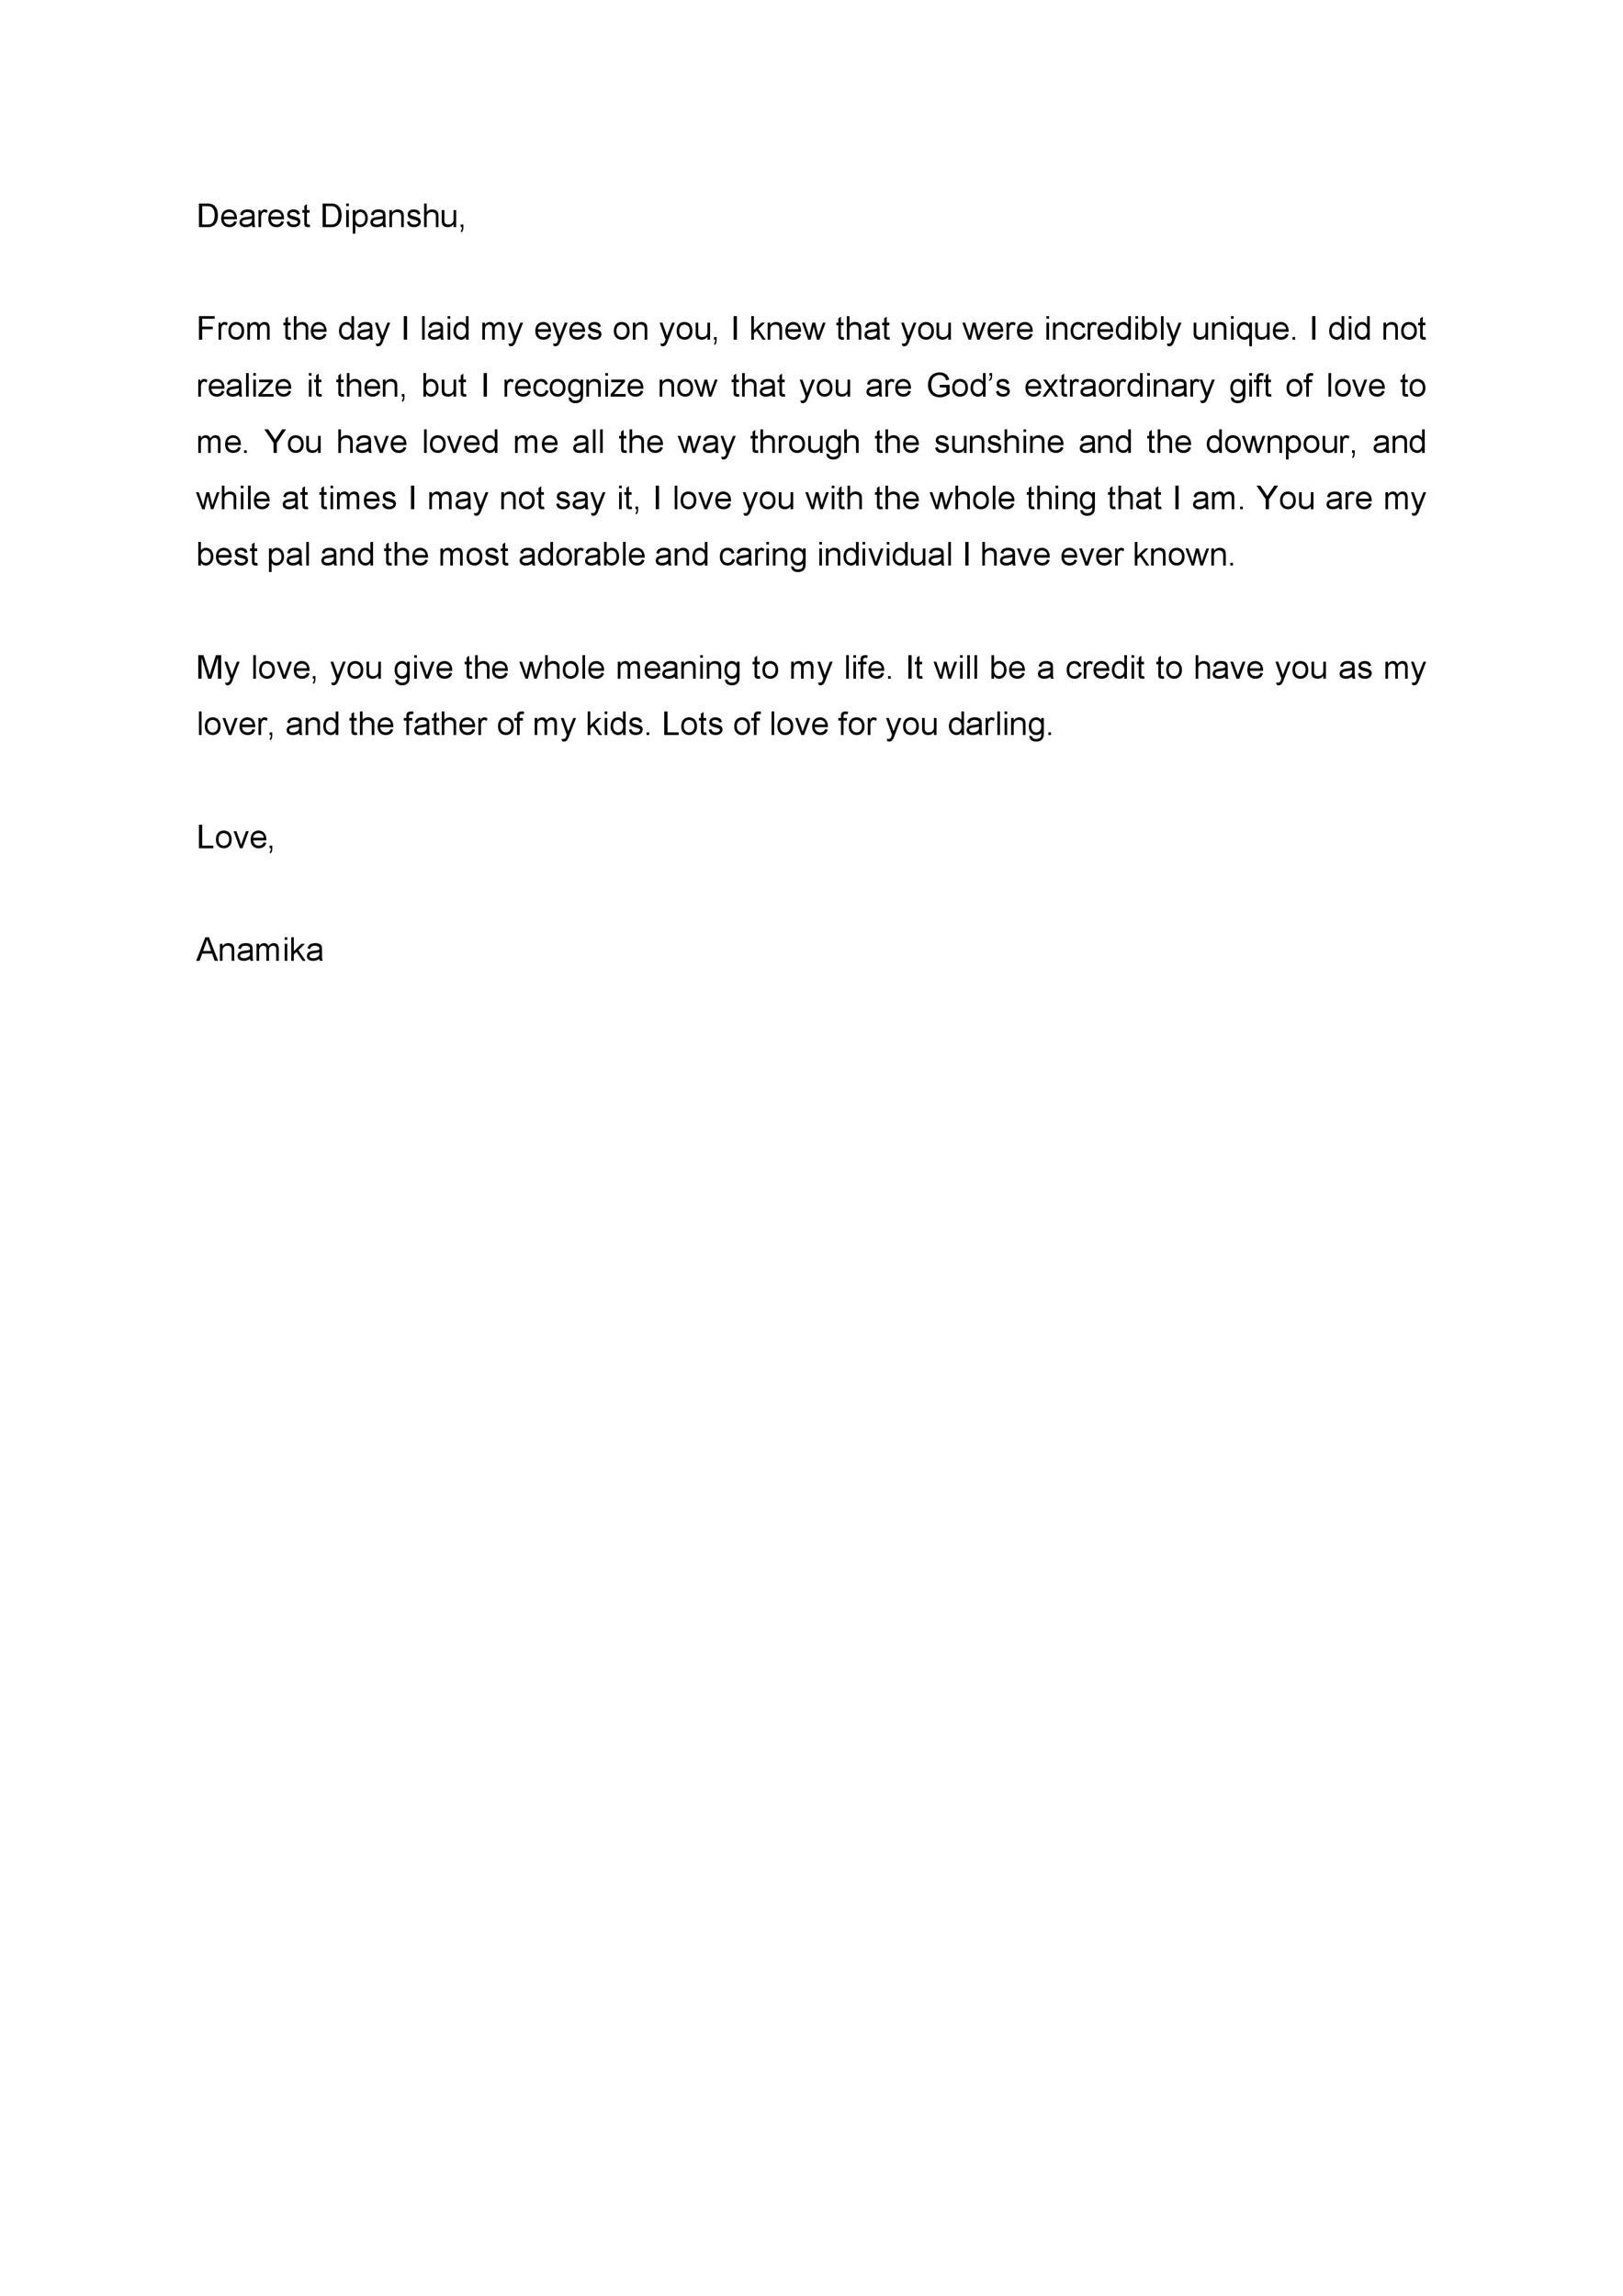 Relationship Letter To Boyfriend from templatelab.com